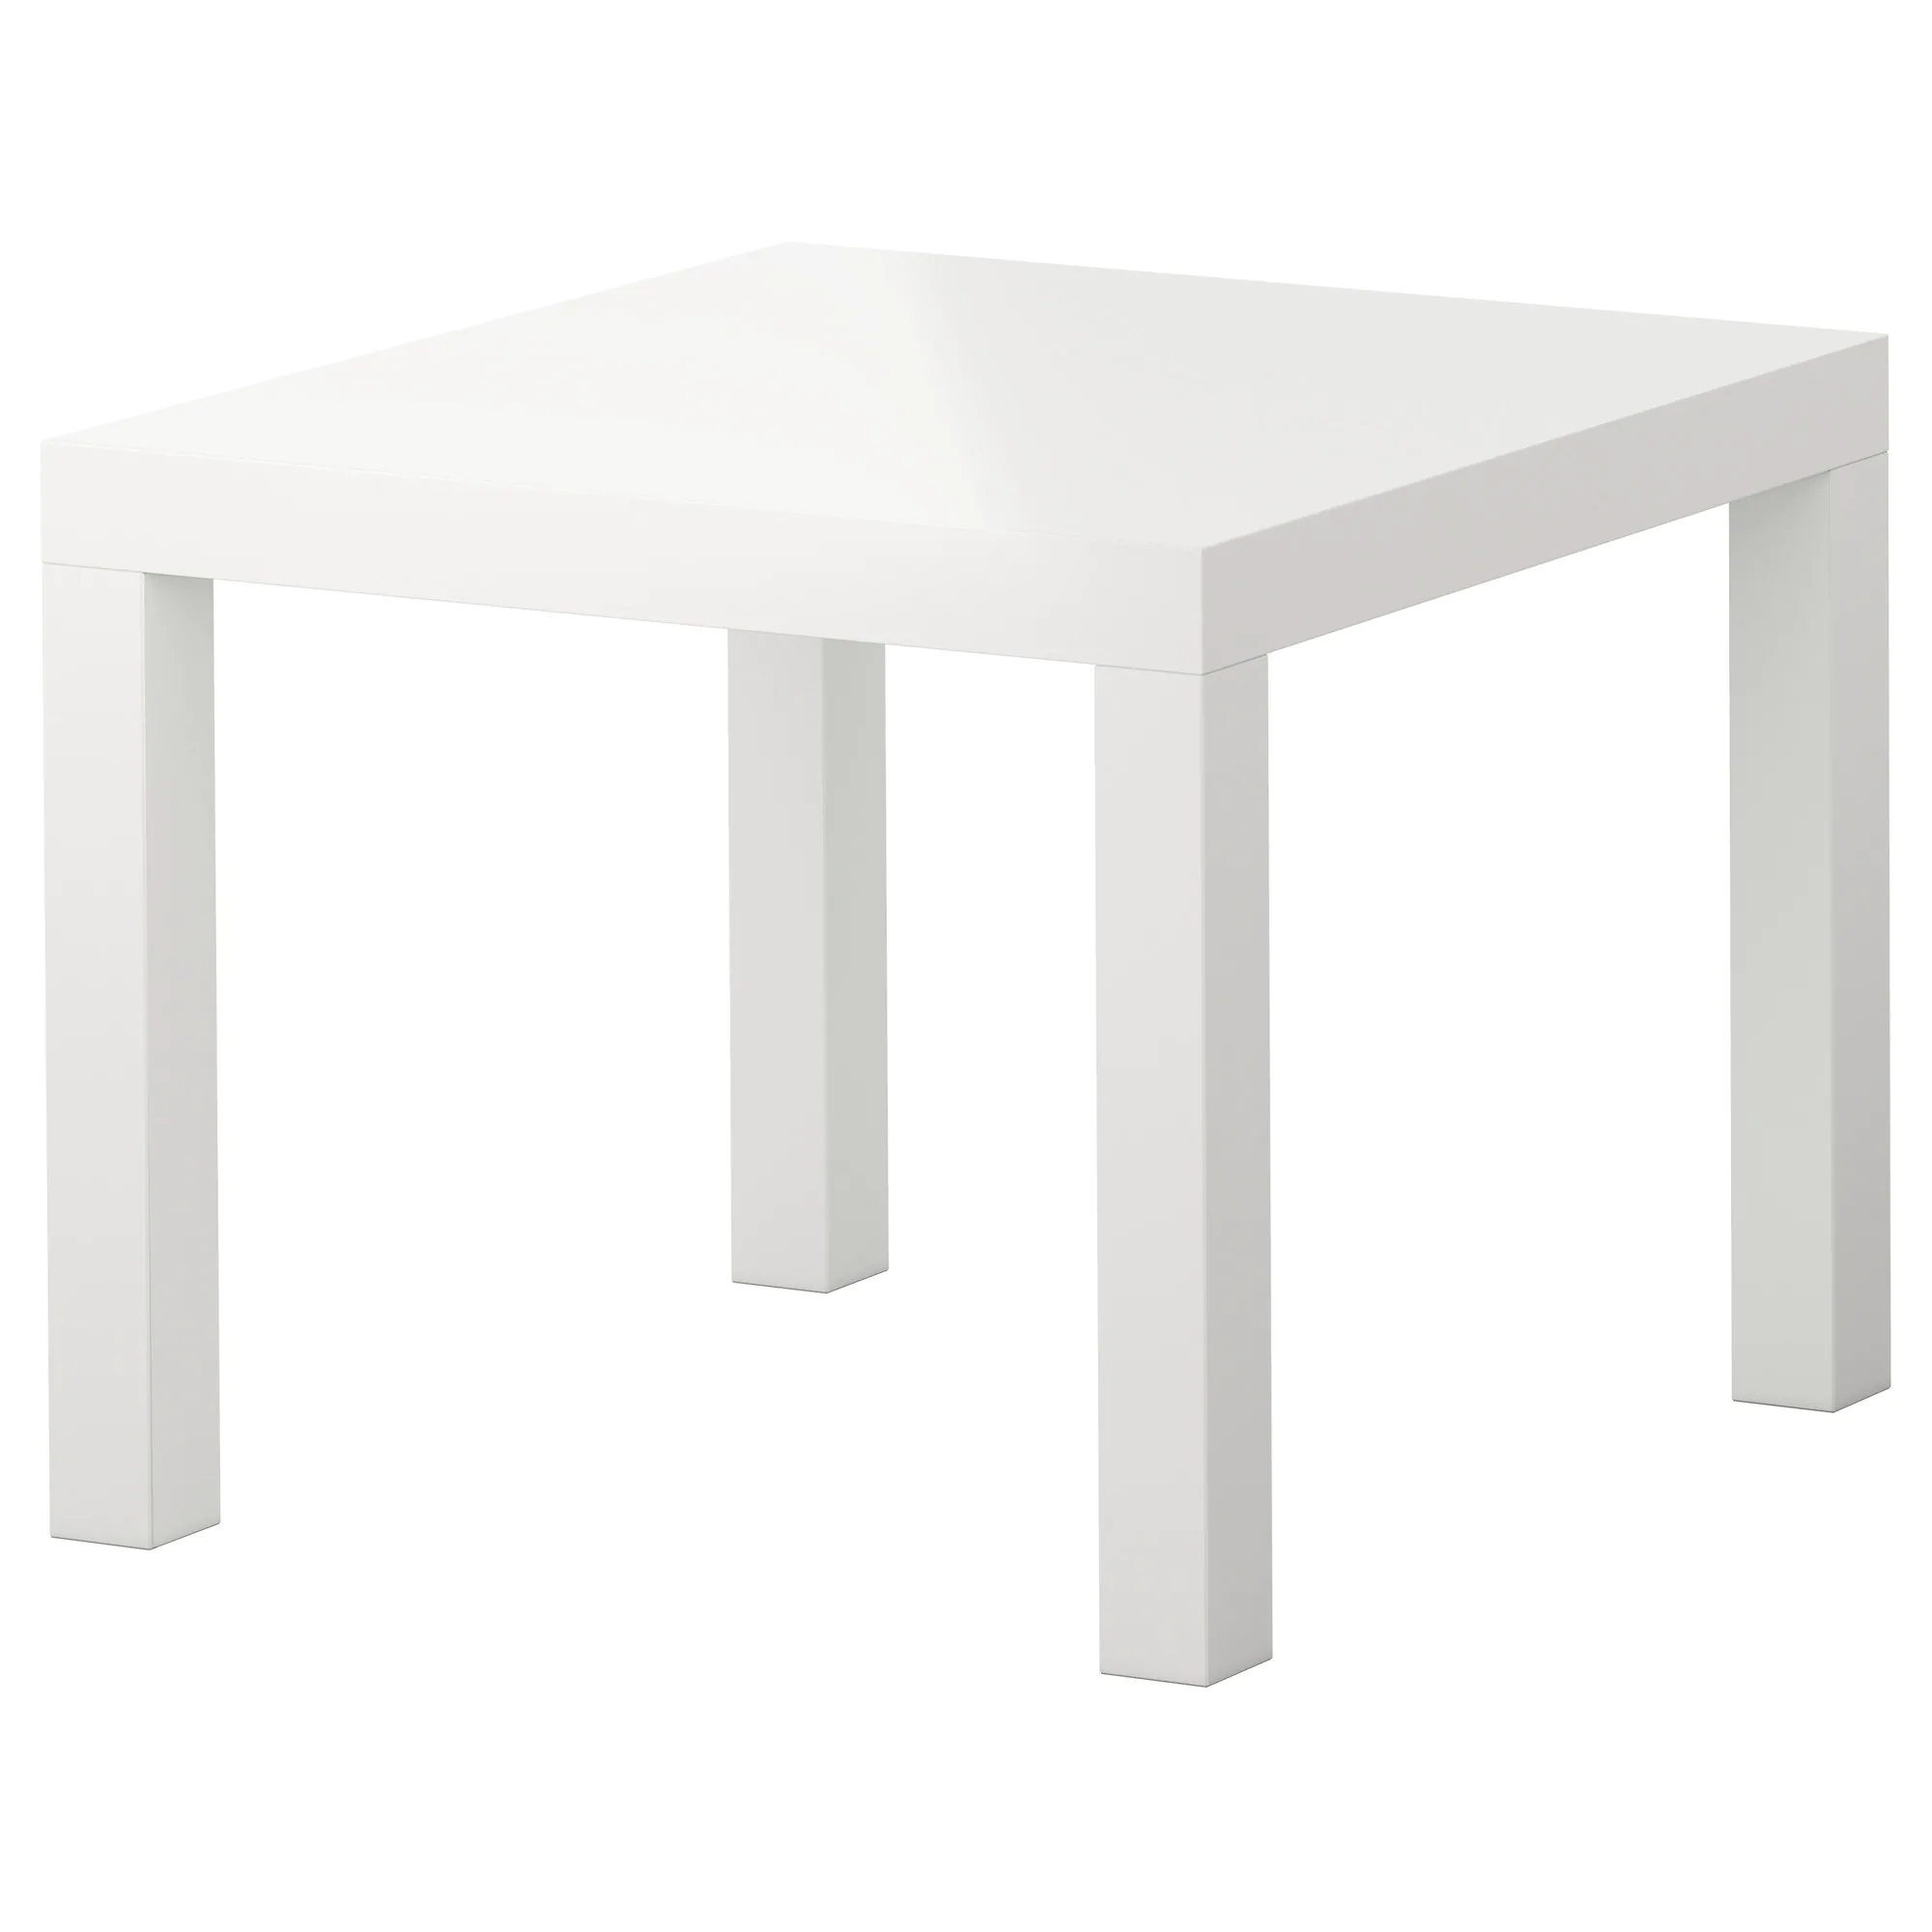 lack side table high gloss white ikea outdoor accent the surfaces reflect light and give vibrant look extendable safavieh end yellow umbrella floor lamps parquet coffee tablecloth